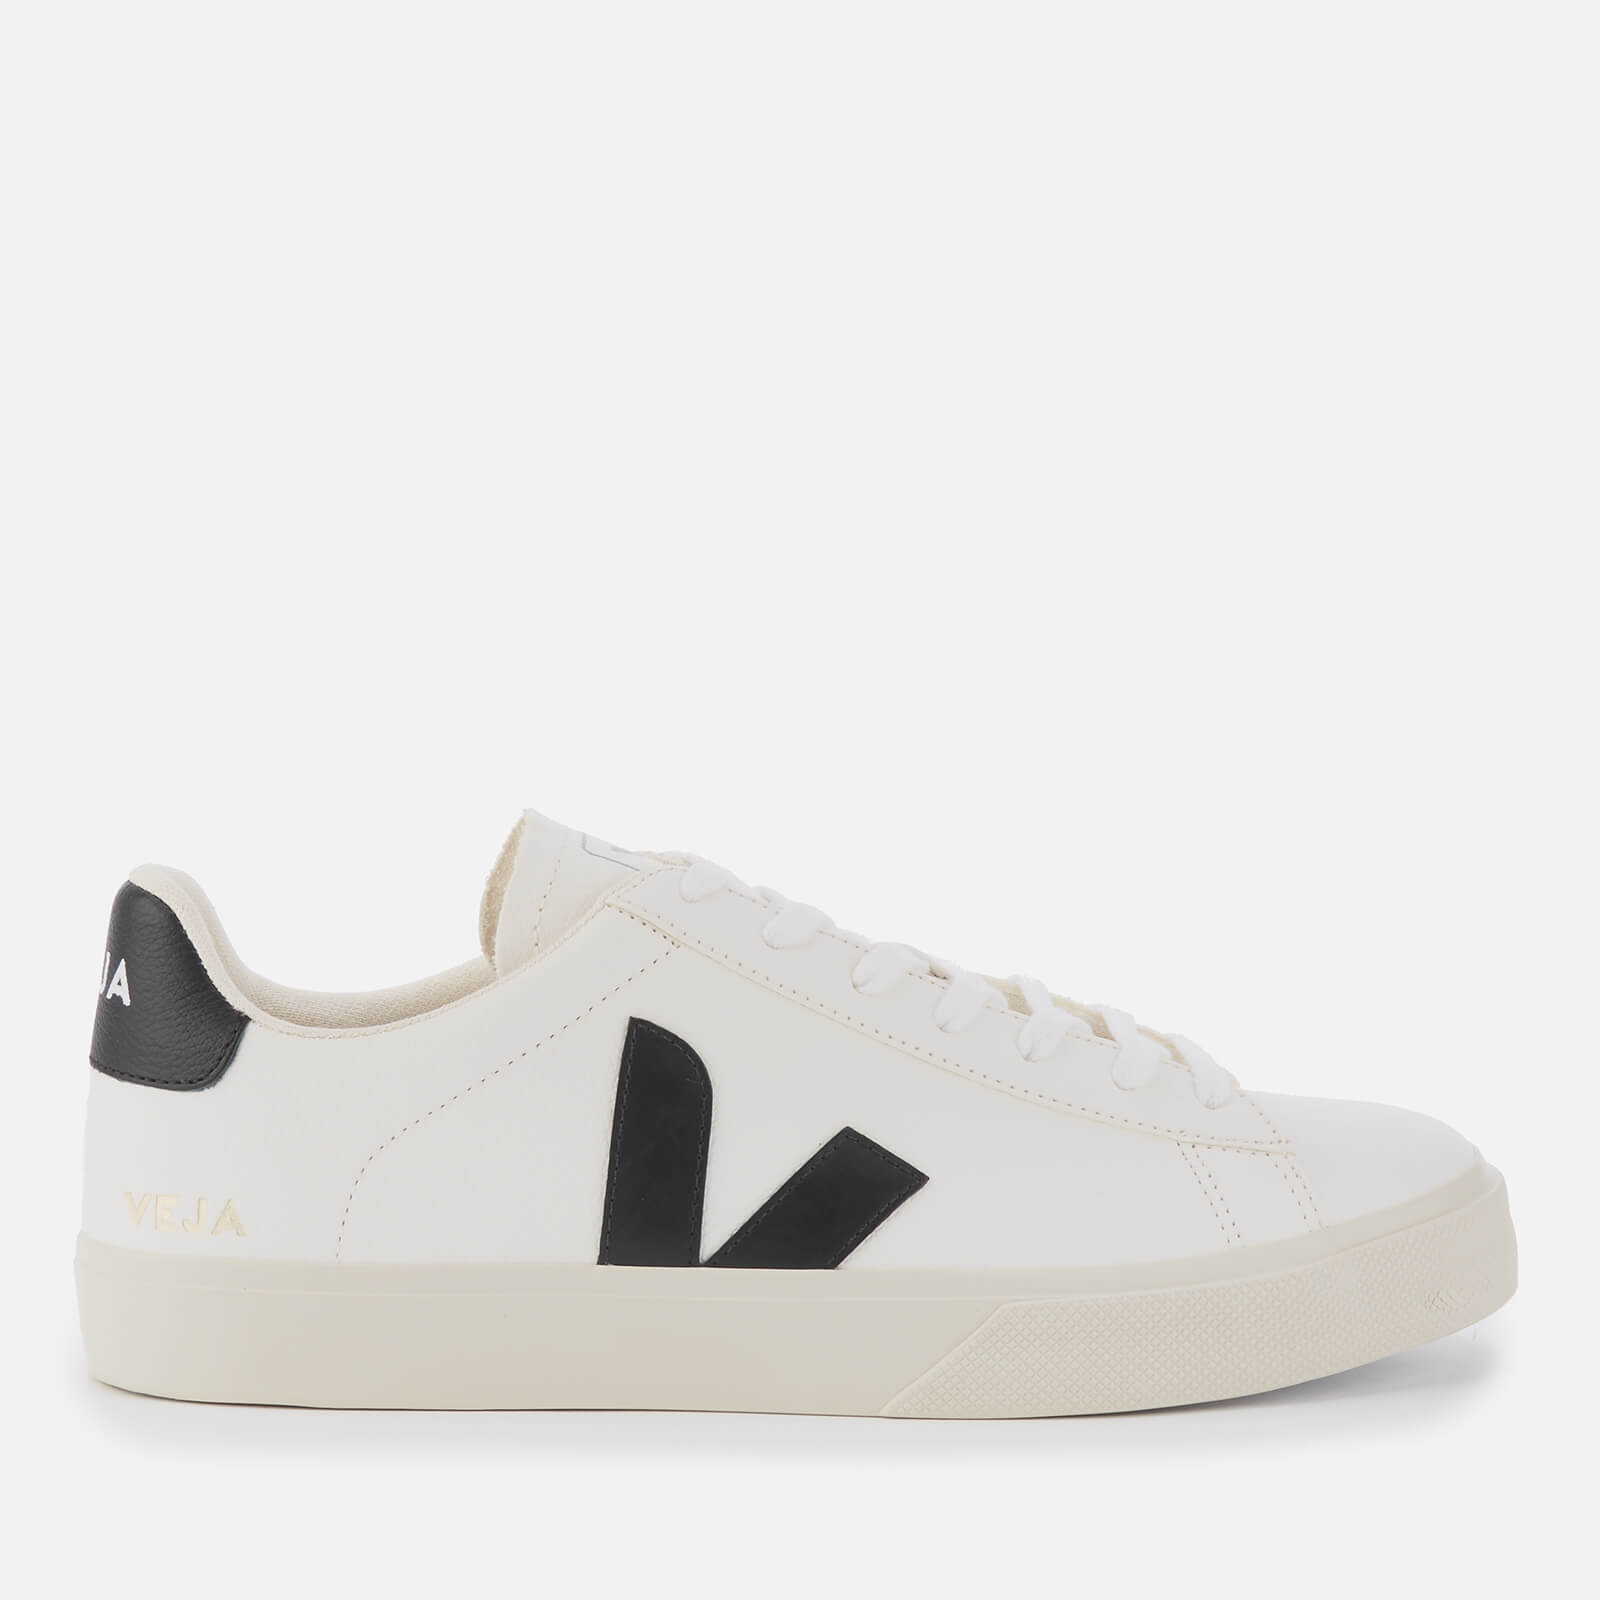 Veja Men’s Campo Chrome Free Leather Trainers - Extra White/Black